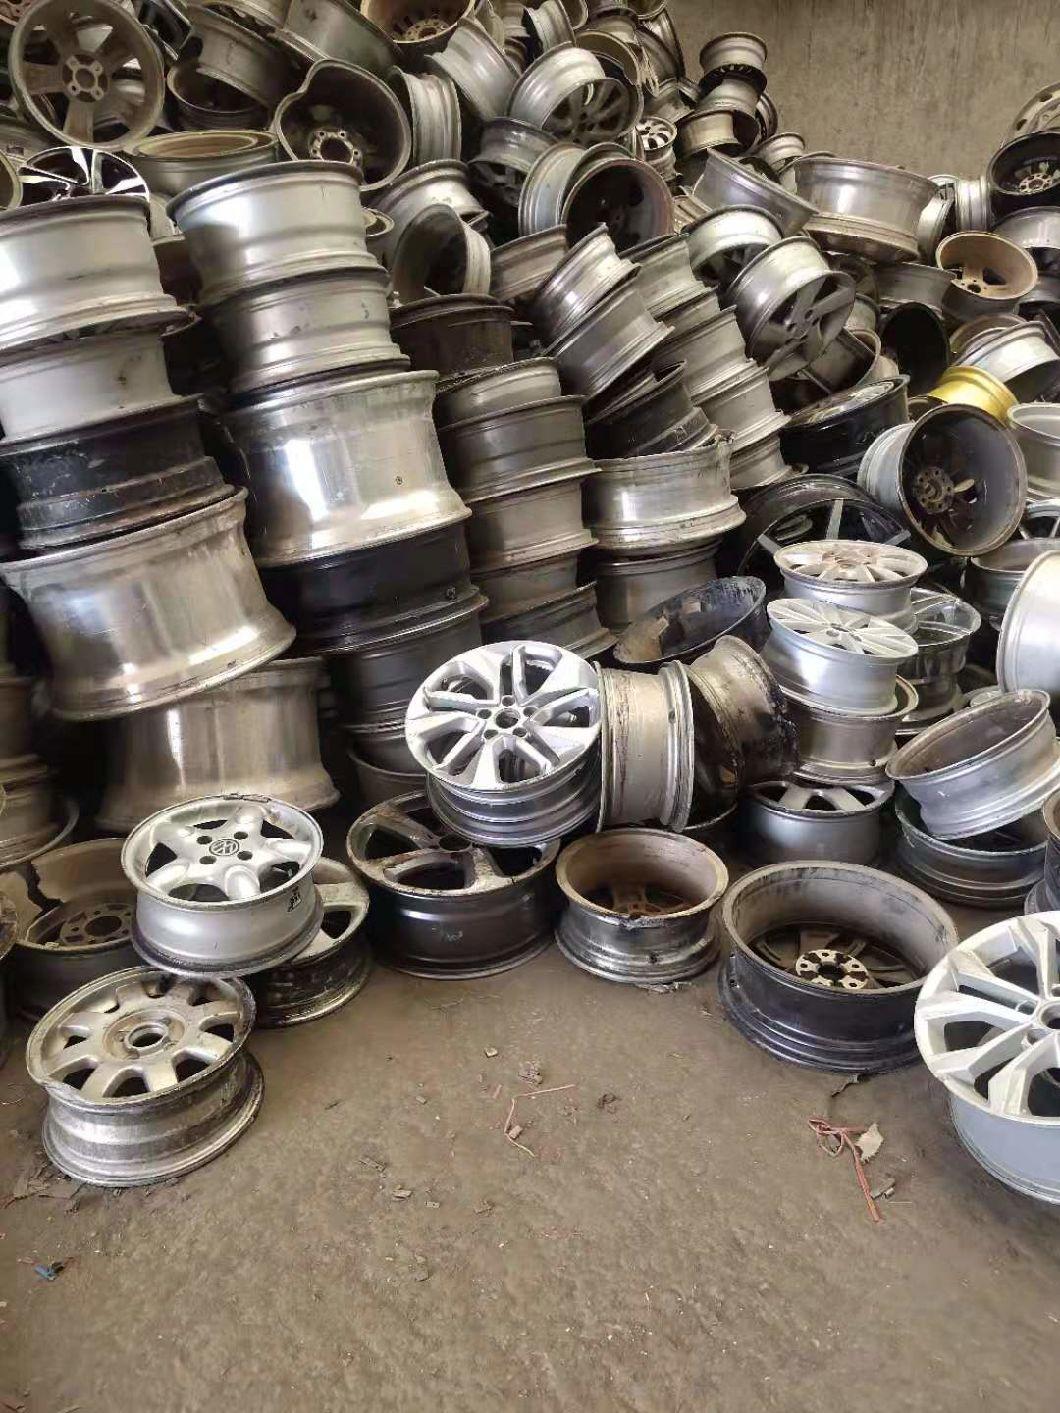 Aluminum Wheel Hub Scrap with a Purity of 99.7%, a High-Quality Product Made in China